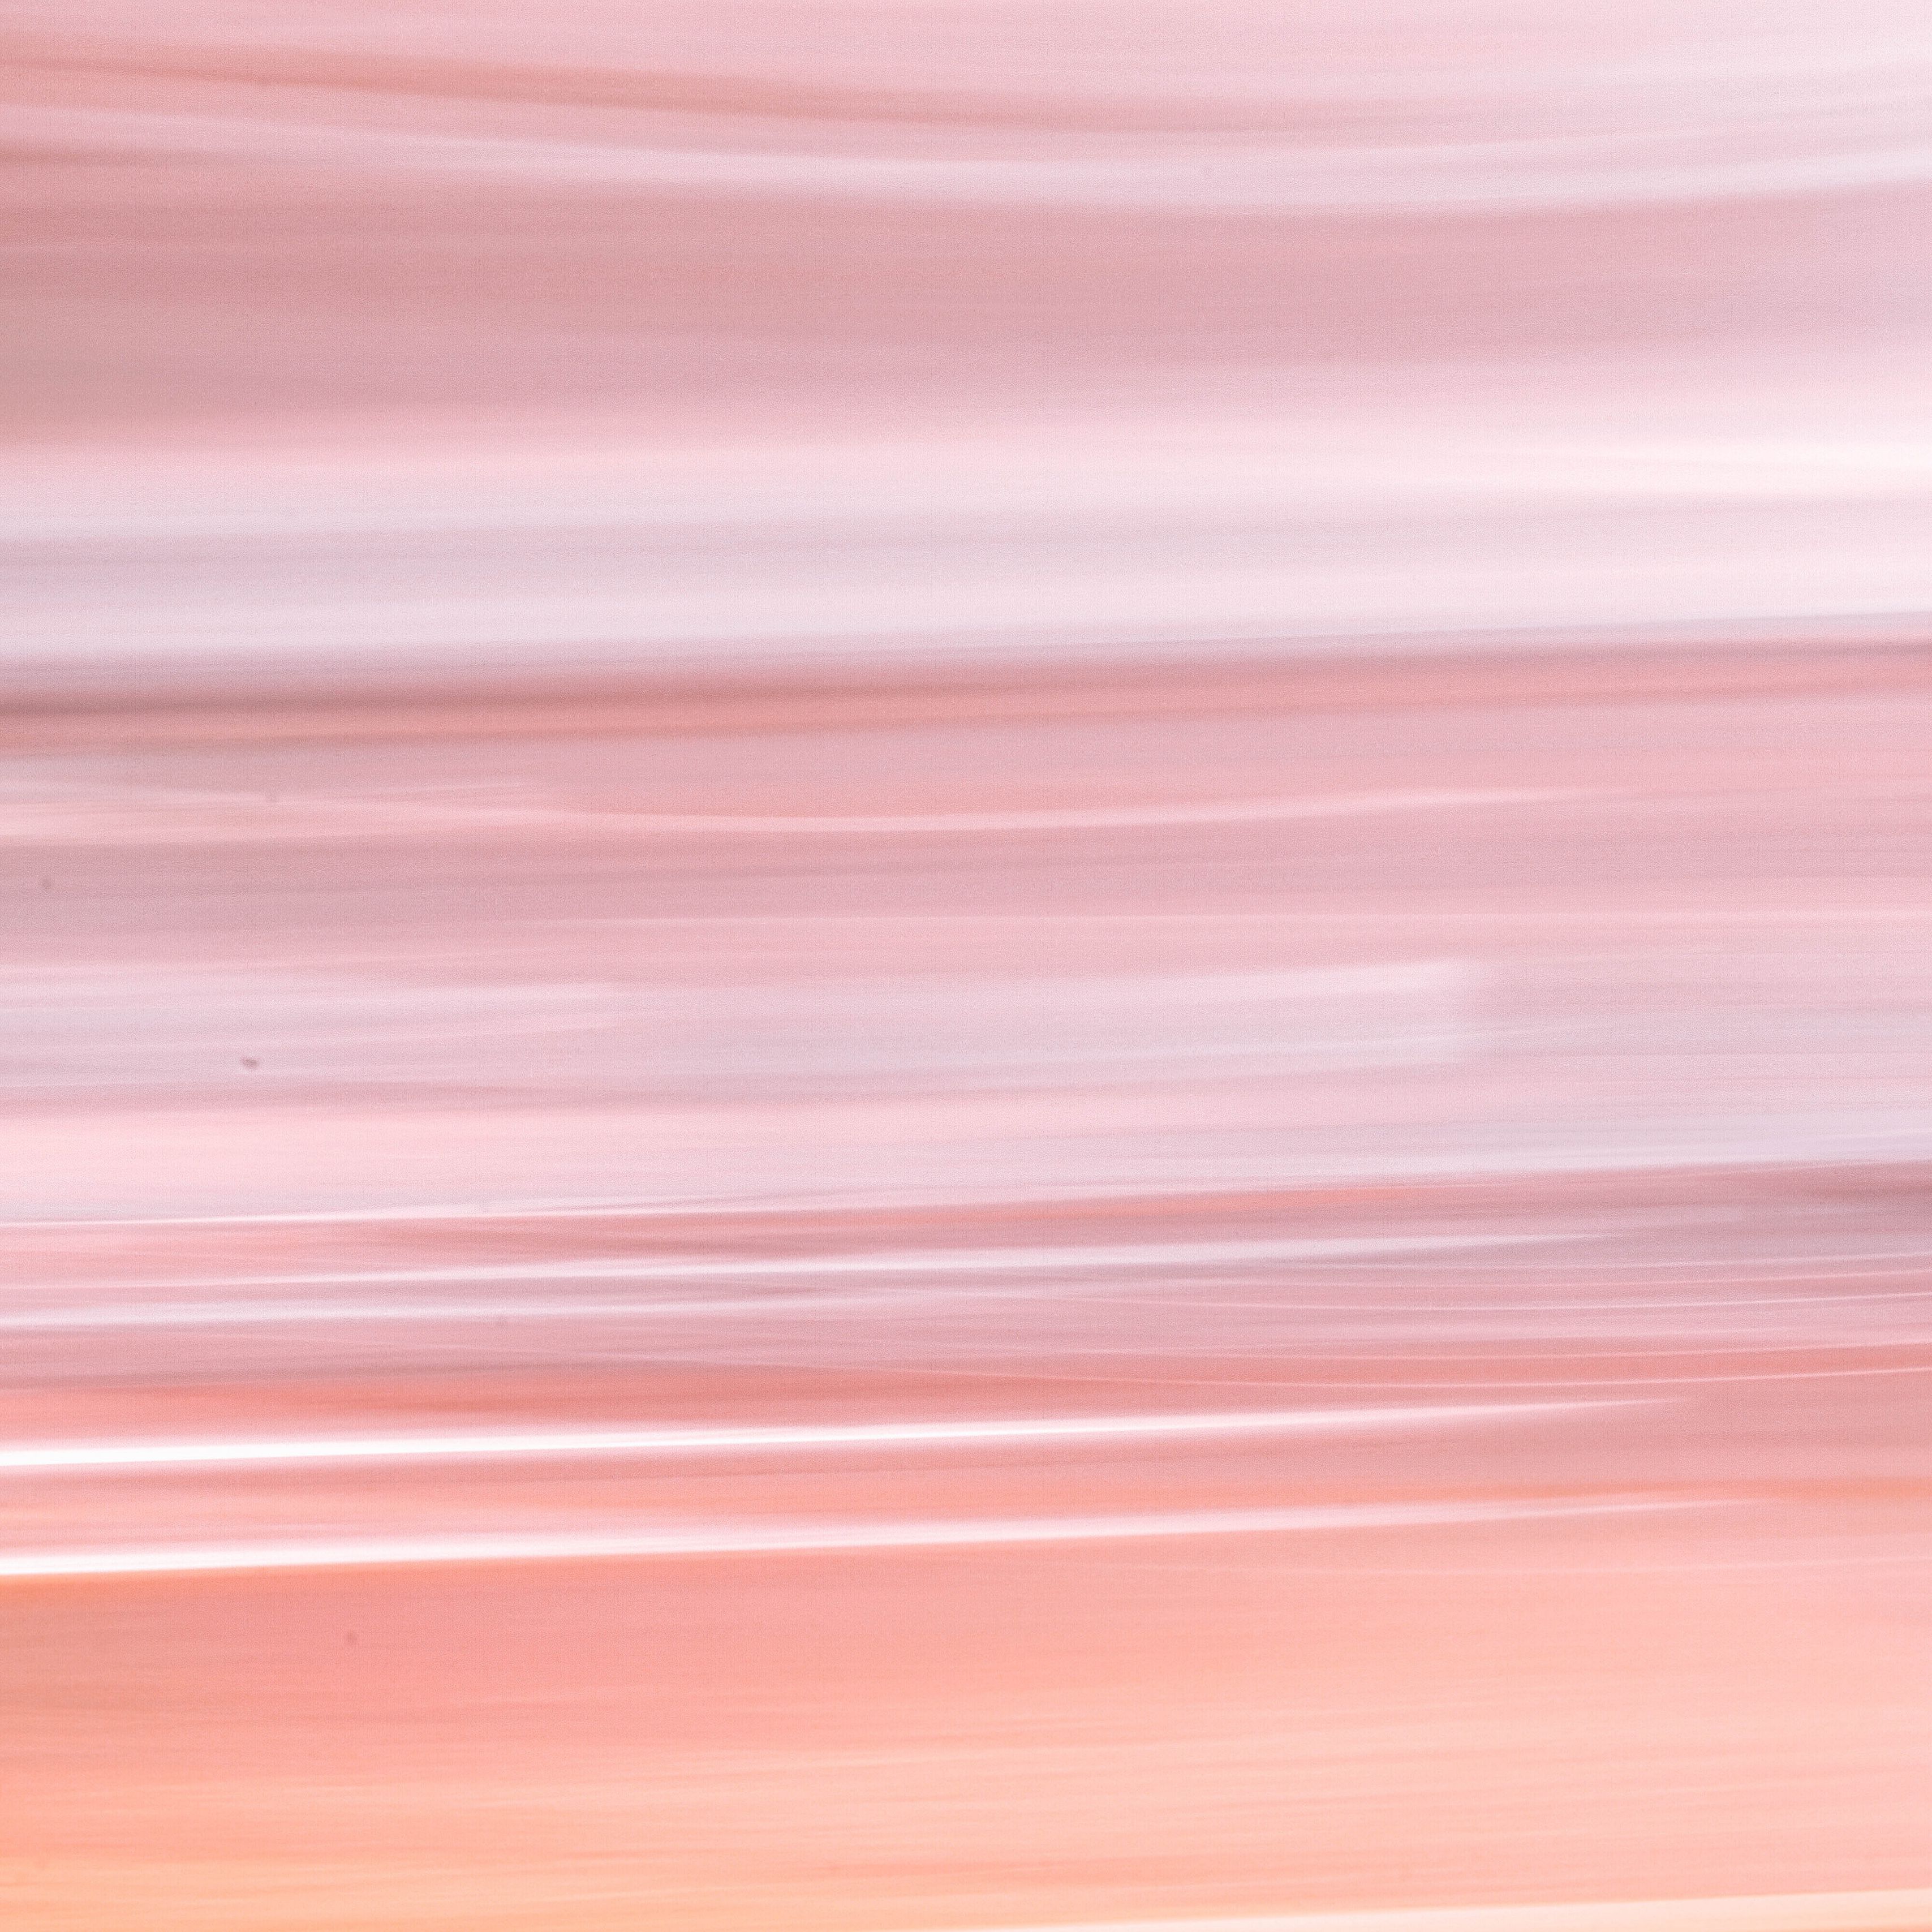 Download wallpaper 3415x3415 stripes, blur, abstraction, pink, pastel ipad  pro 